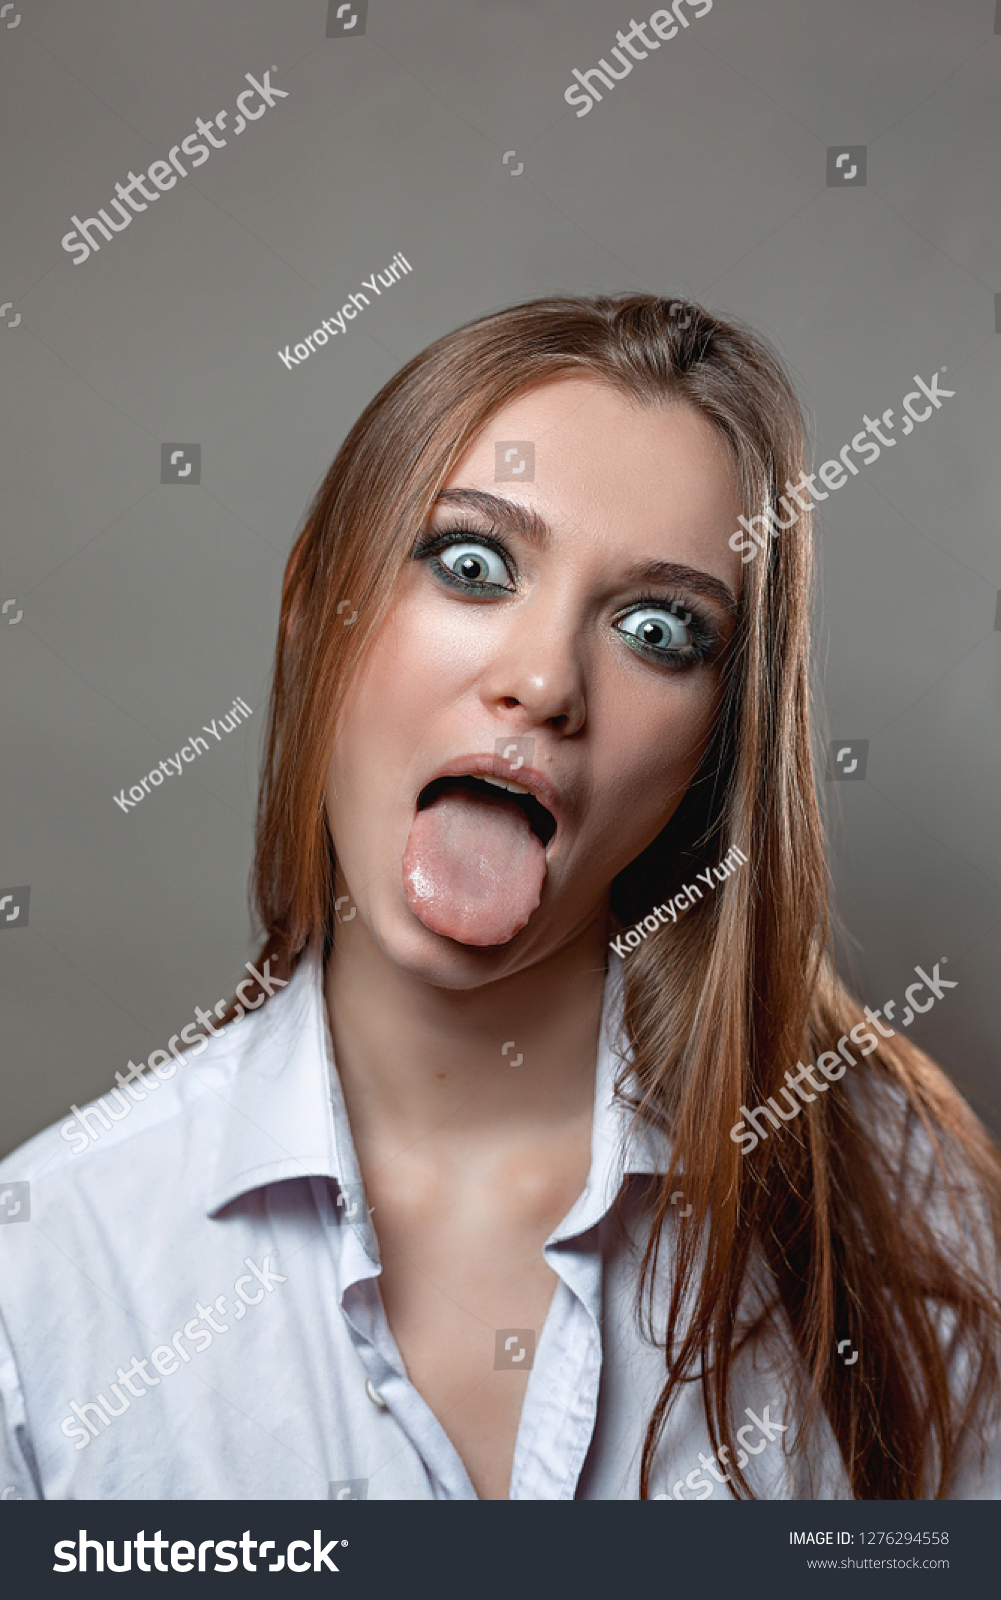 david wagenaar recommends Hot Girl Tongue Out